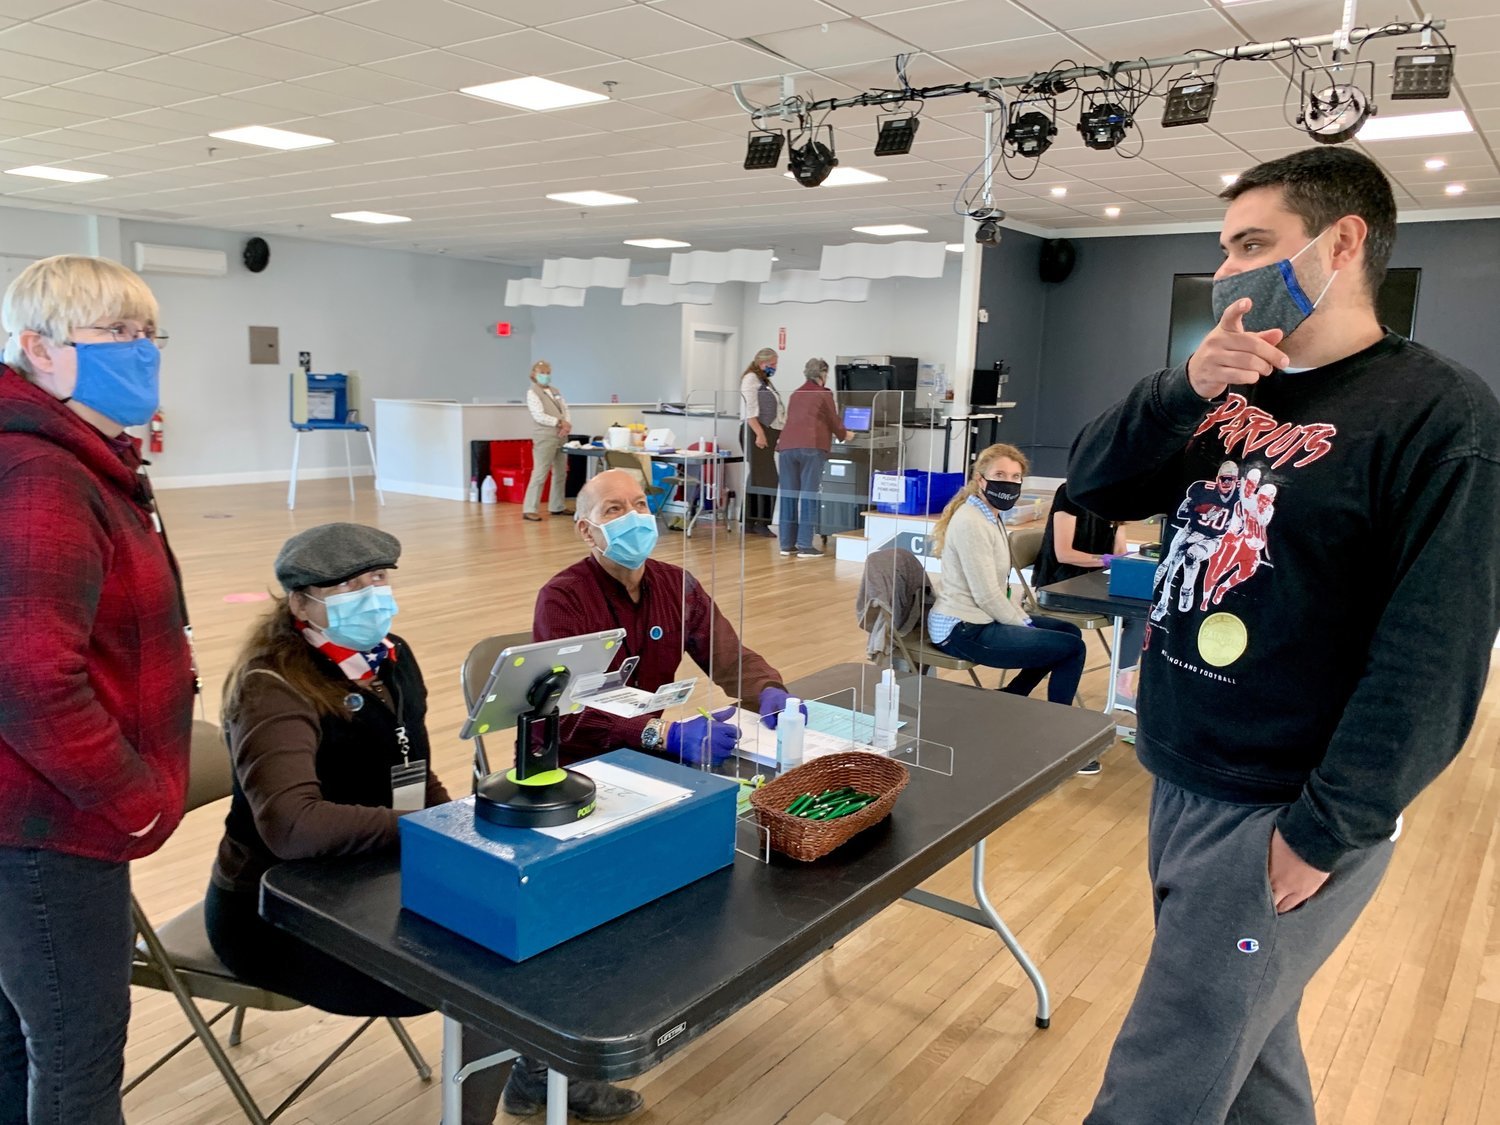 Election officials Elen Vadney (left) Debra Cardoza, and Gerry Kempen, working at CFP Arts, Wellness, and Community Center in Common Fence Point, help voter Ross Harrington during the November 2020 election.